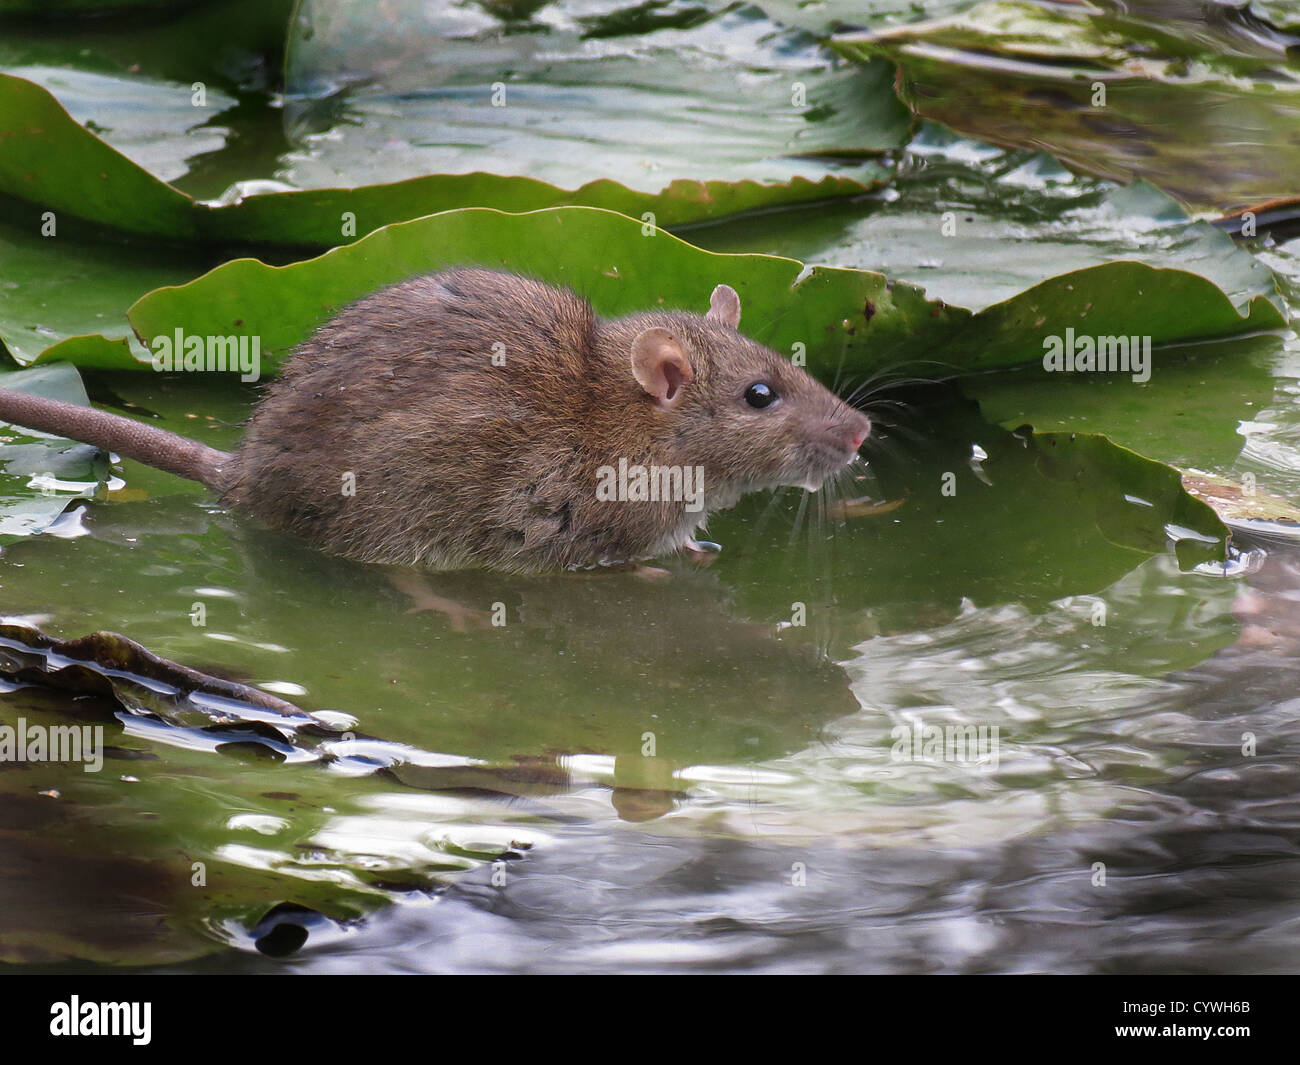 Common rat on water Lilly leaf. Stock Photo